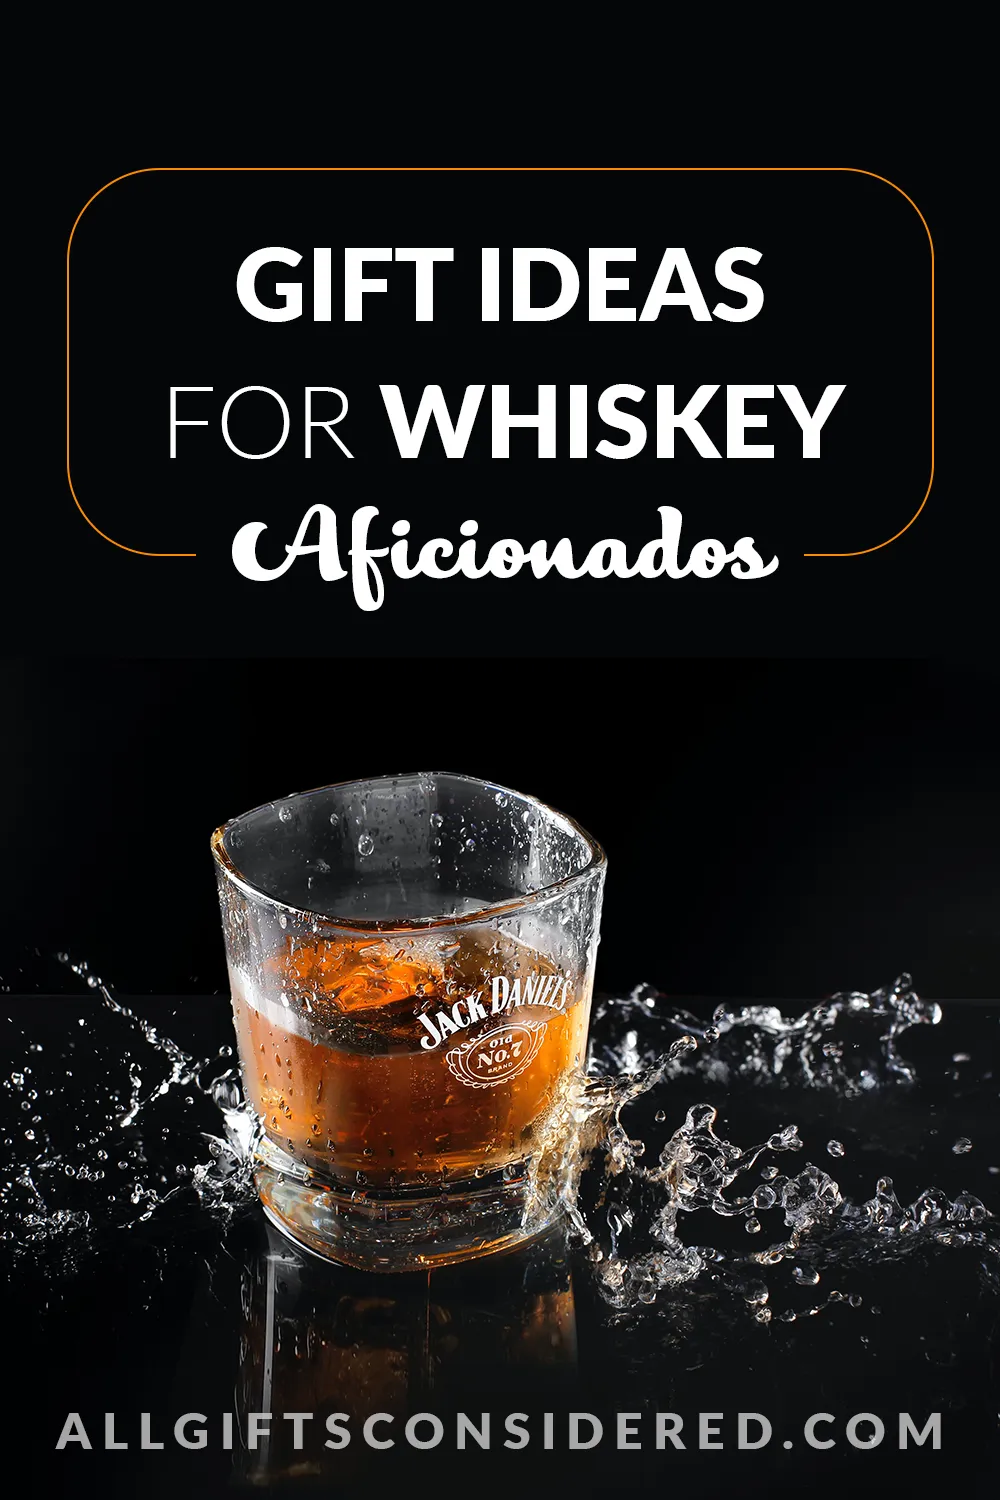 whiskey gift ideas - feature image